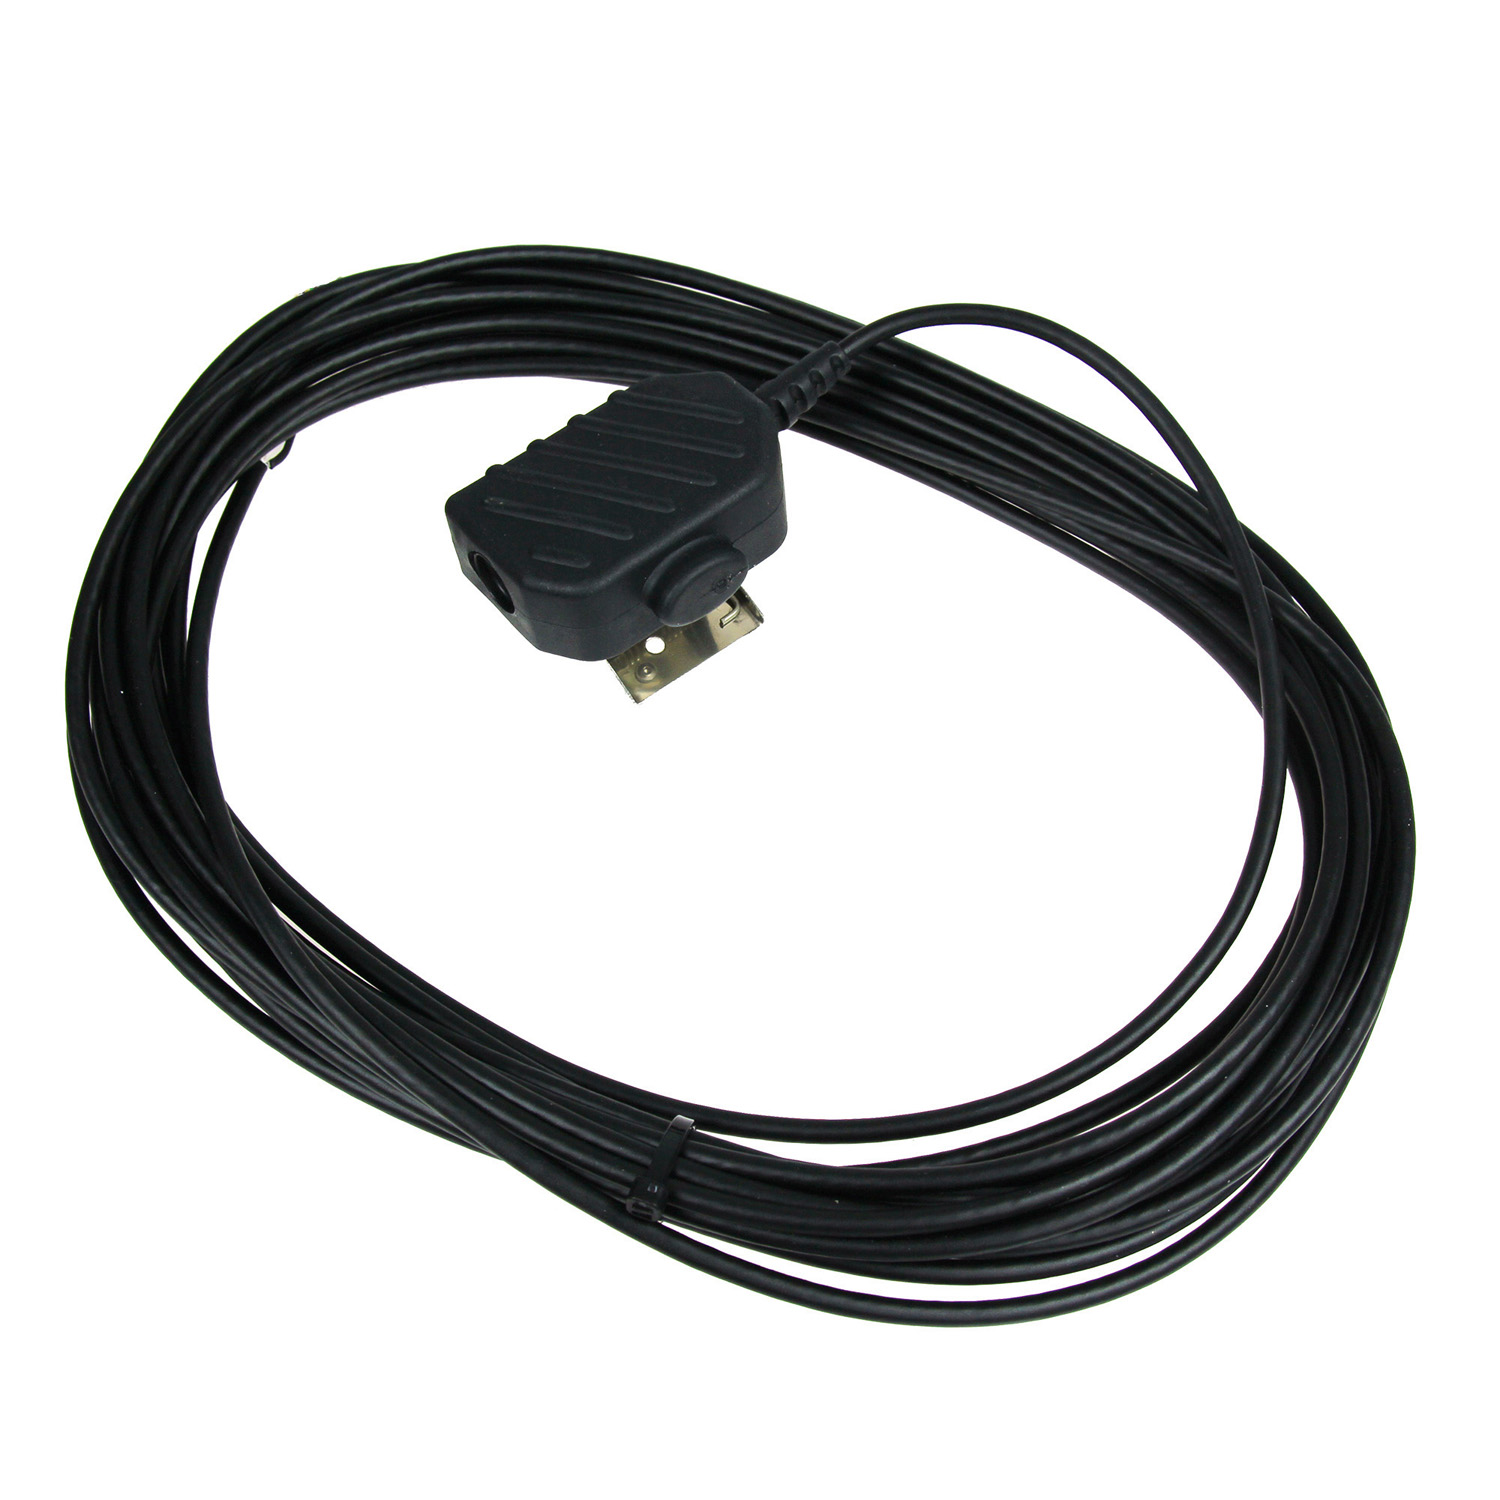 1008140225 TA-22b 10m cable and plugbox w/PTT for industrial headset